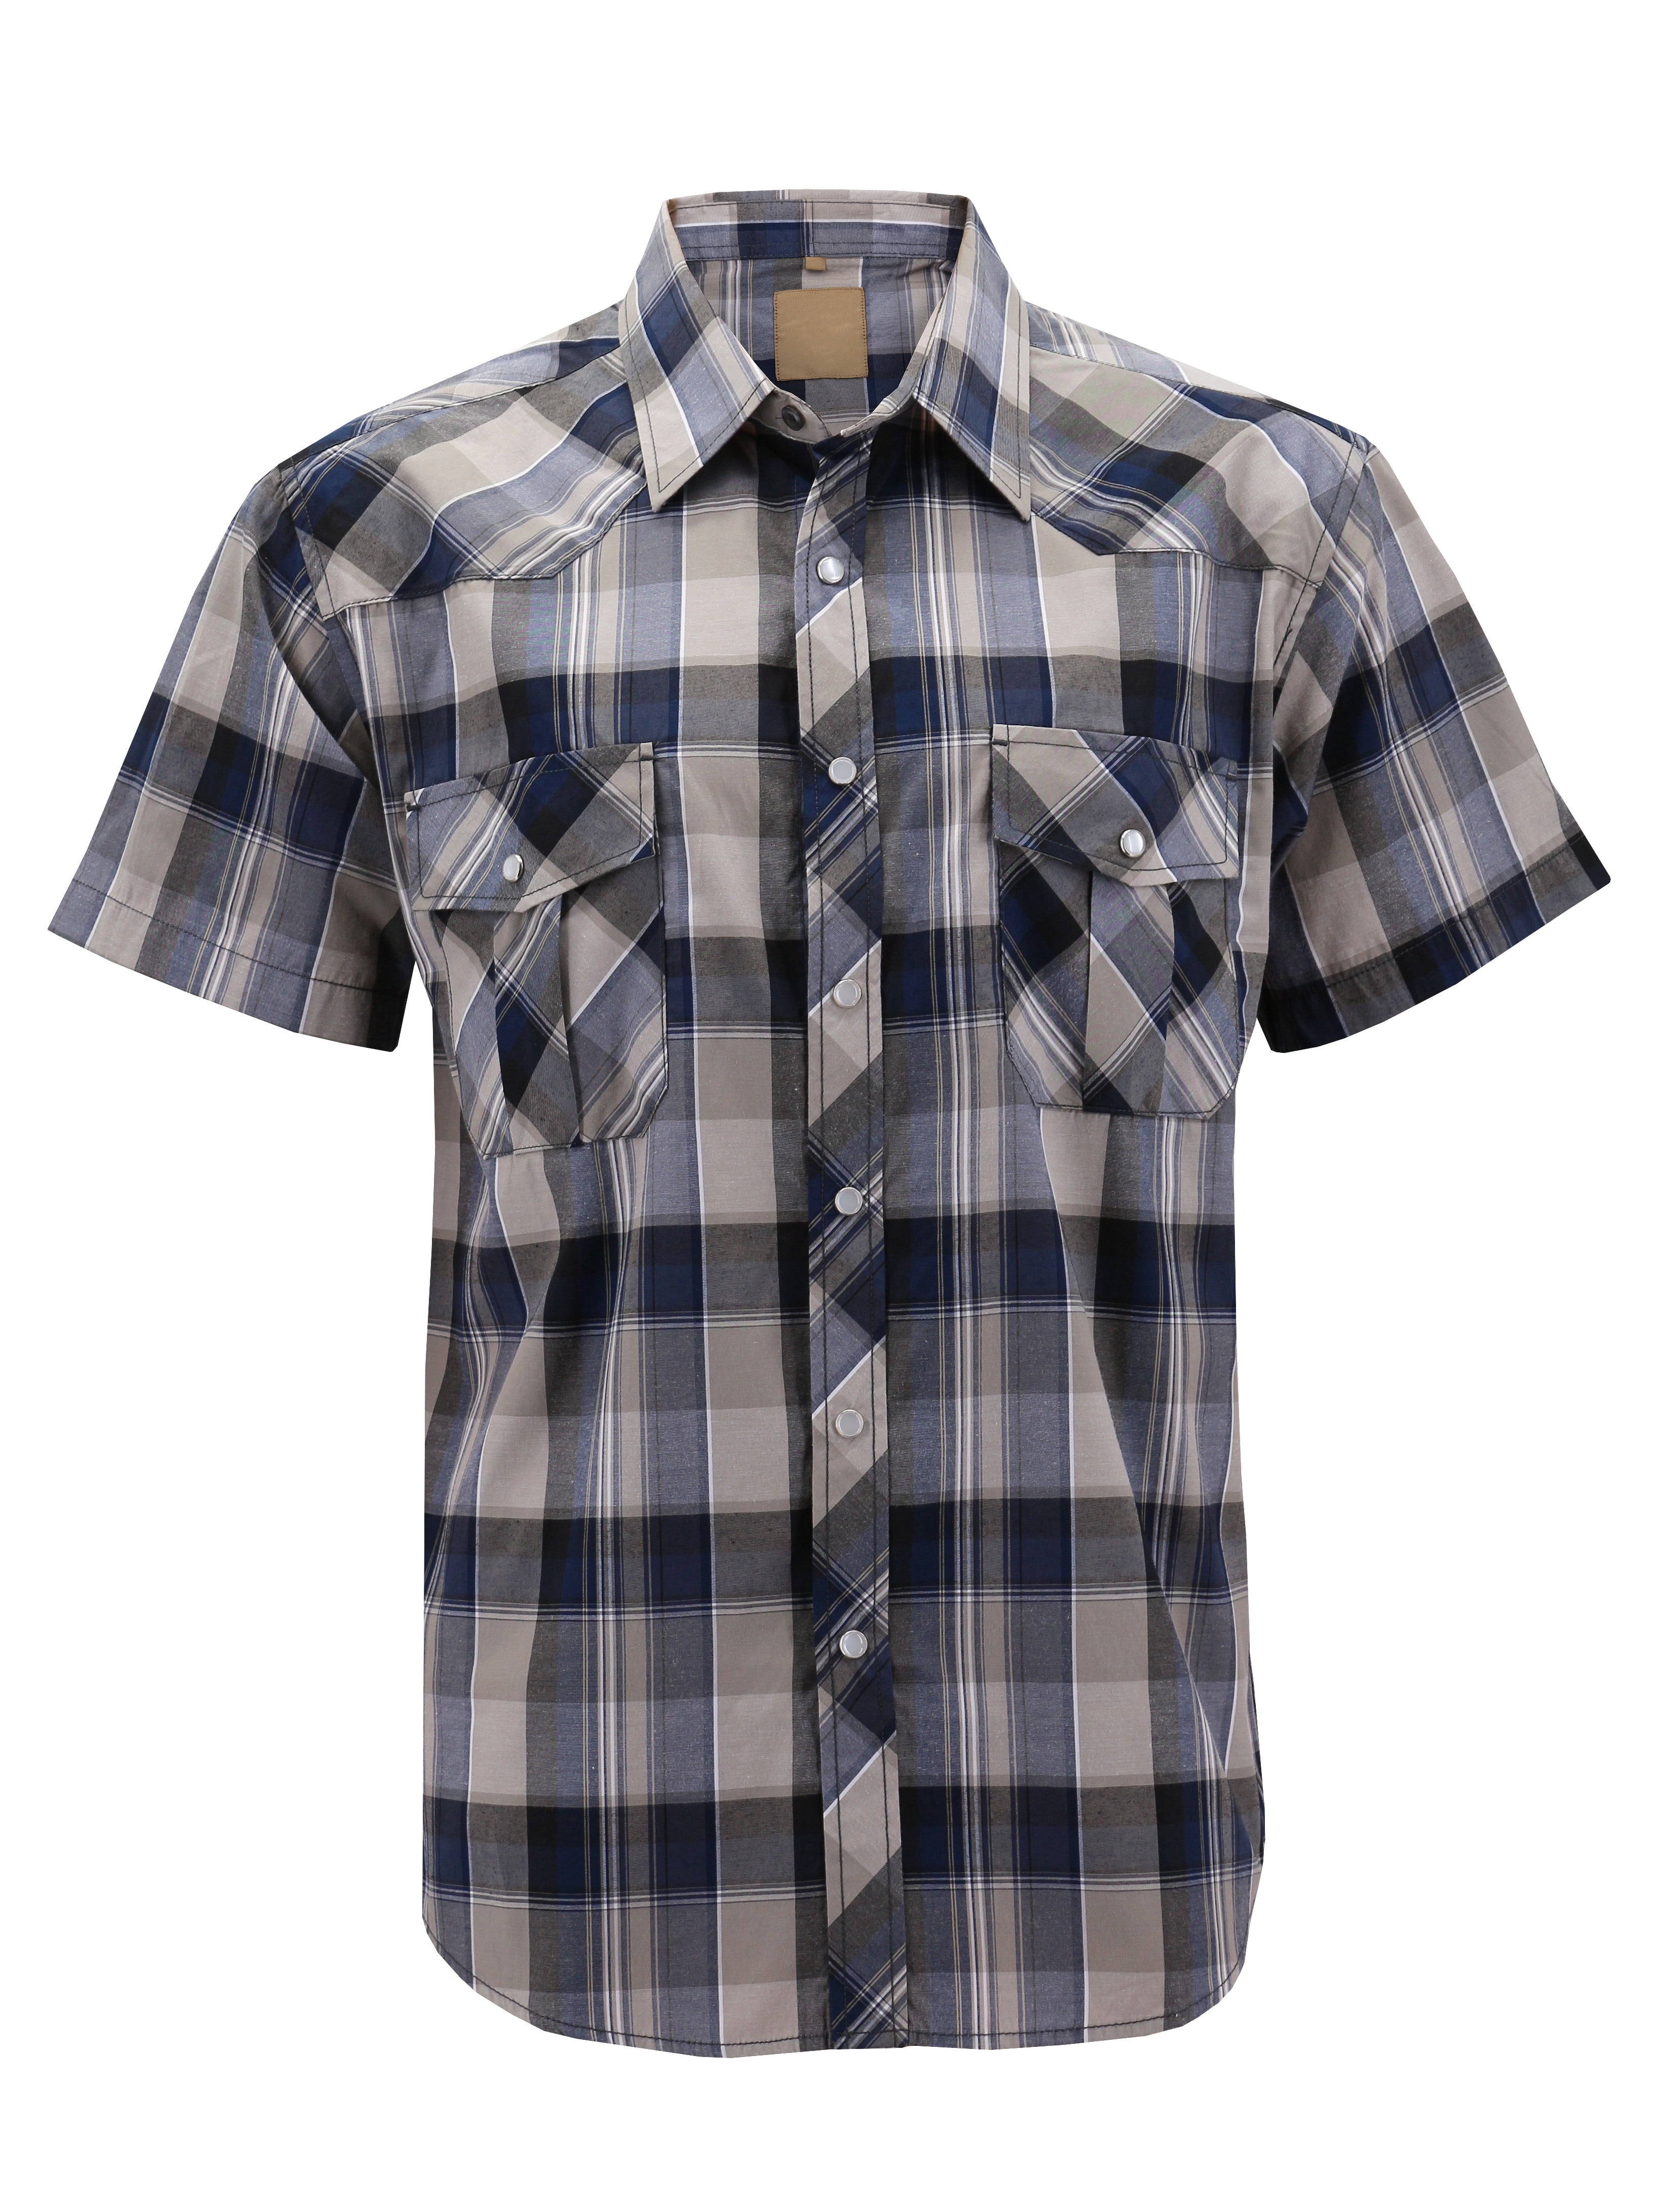 VKWEAR - Men’s Western Short Sleeve Button Down Casual Plaid Pearl Snap ...